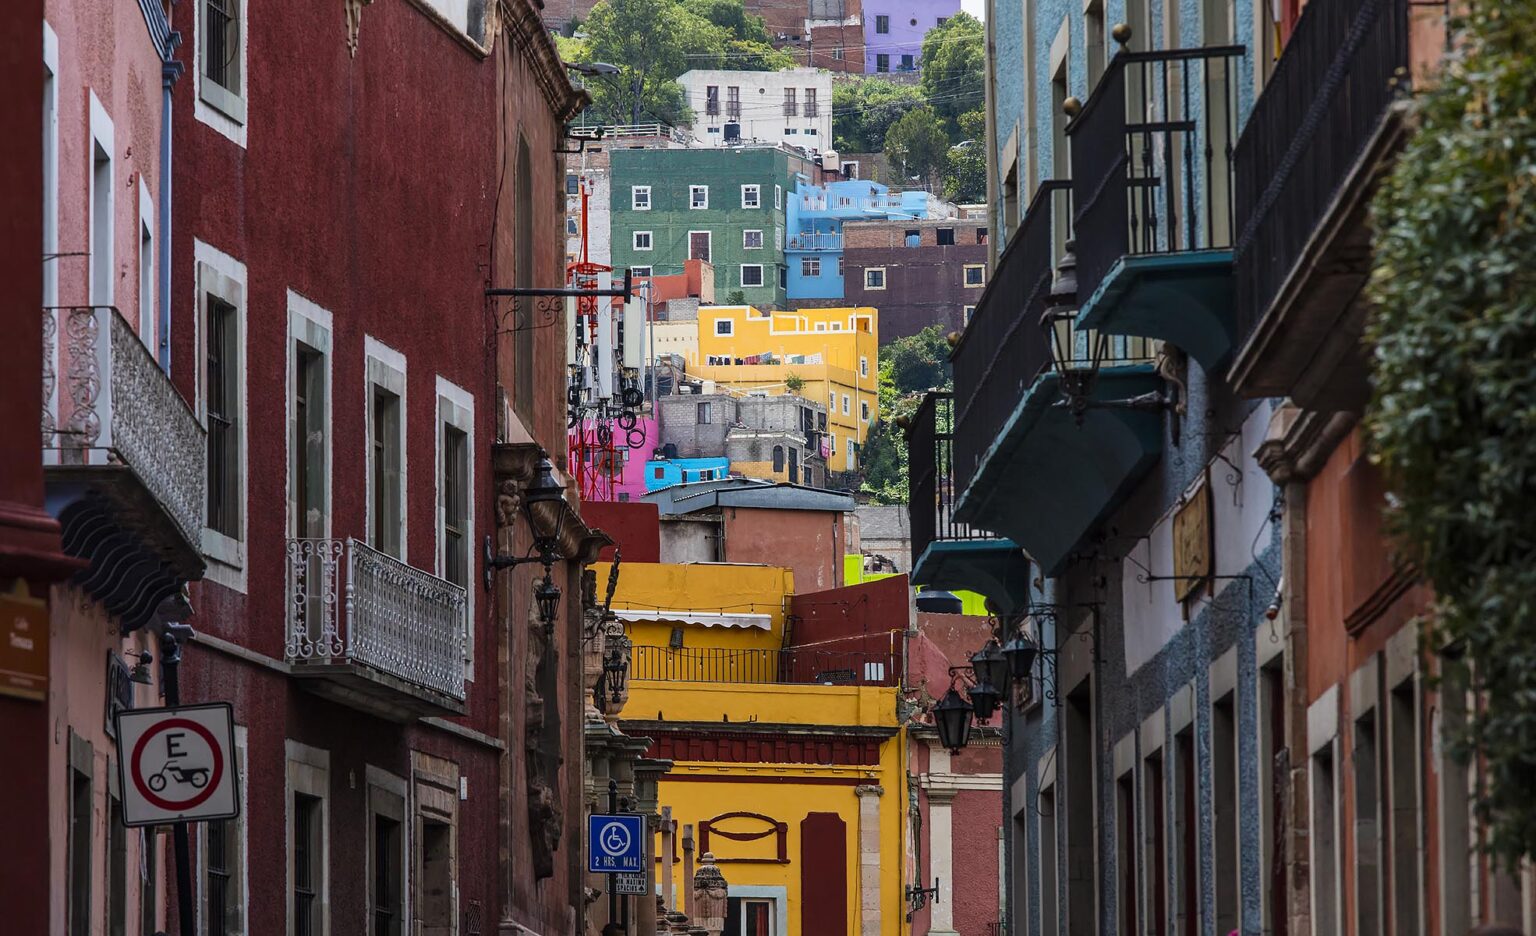 The architecture of the historical city of GUANAJUATO is known for its bright colors - MEXICO